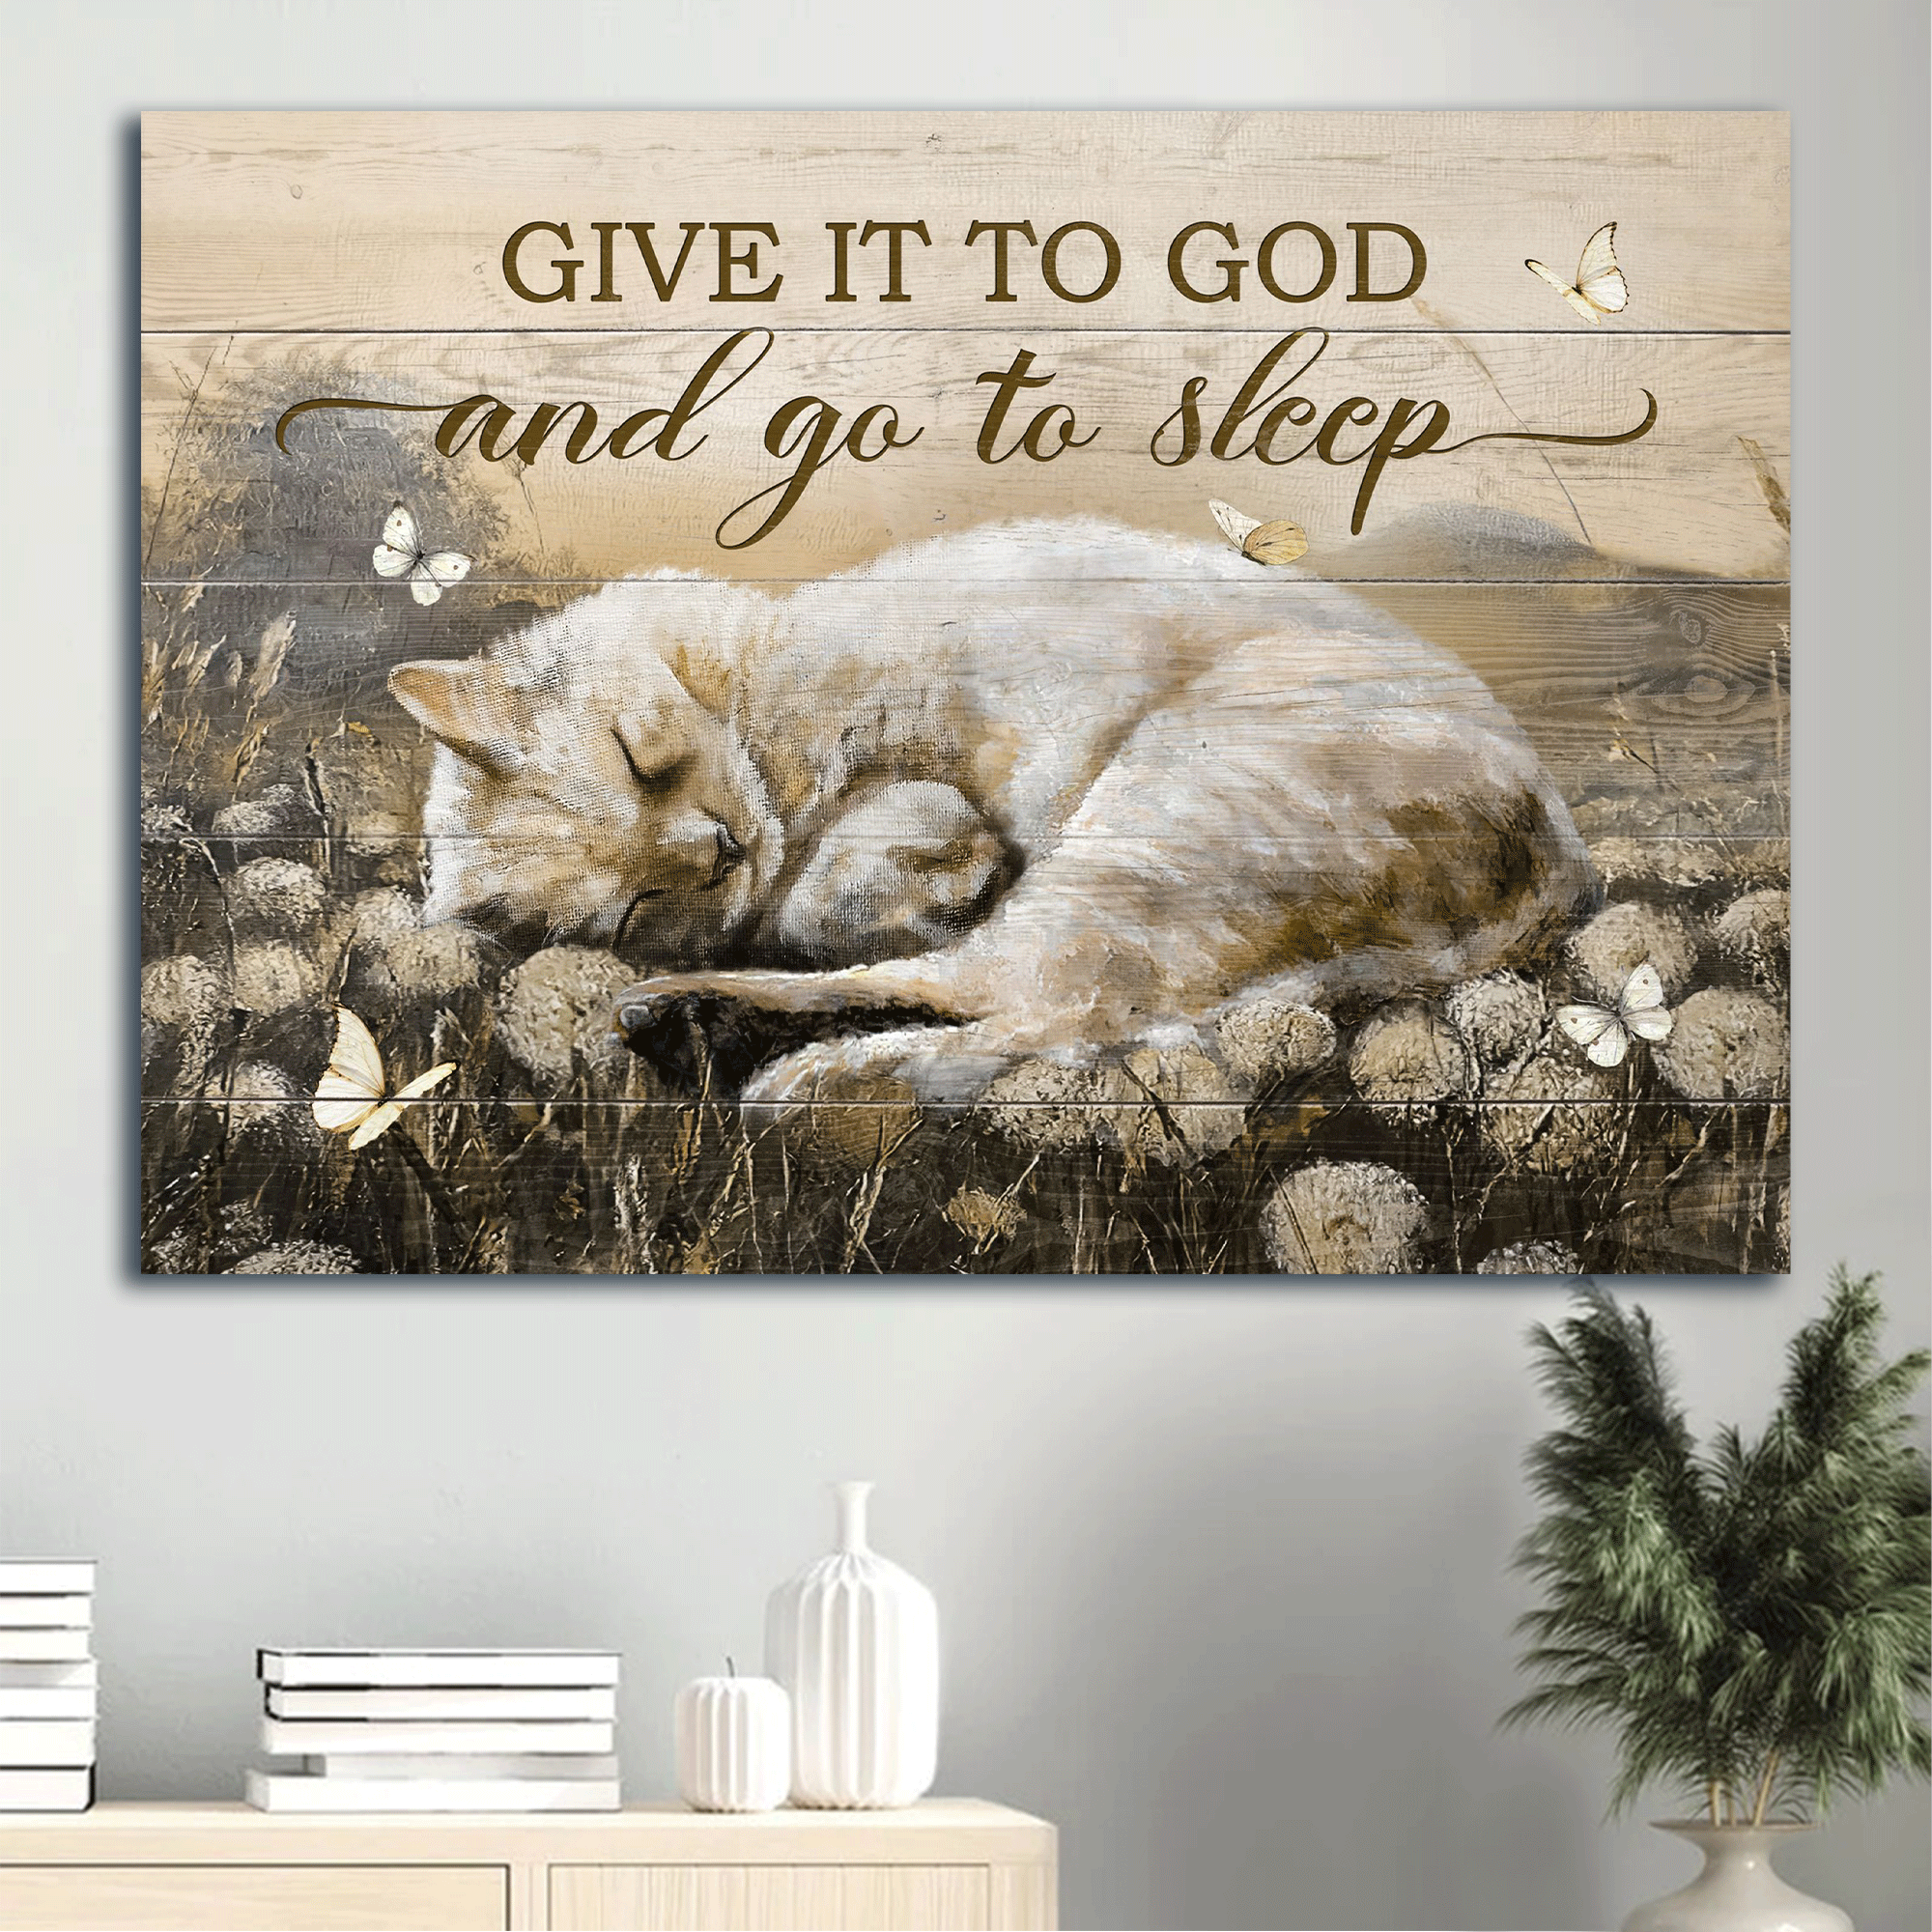 Jesus Landscape Canvas- Dandelion field painting, Sleeping cat, Butterfly canvas- Gift for Christian- Give it to God and go to sleep